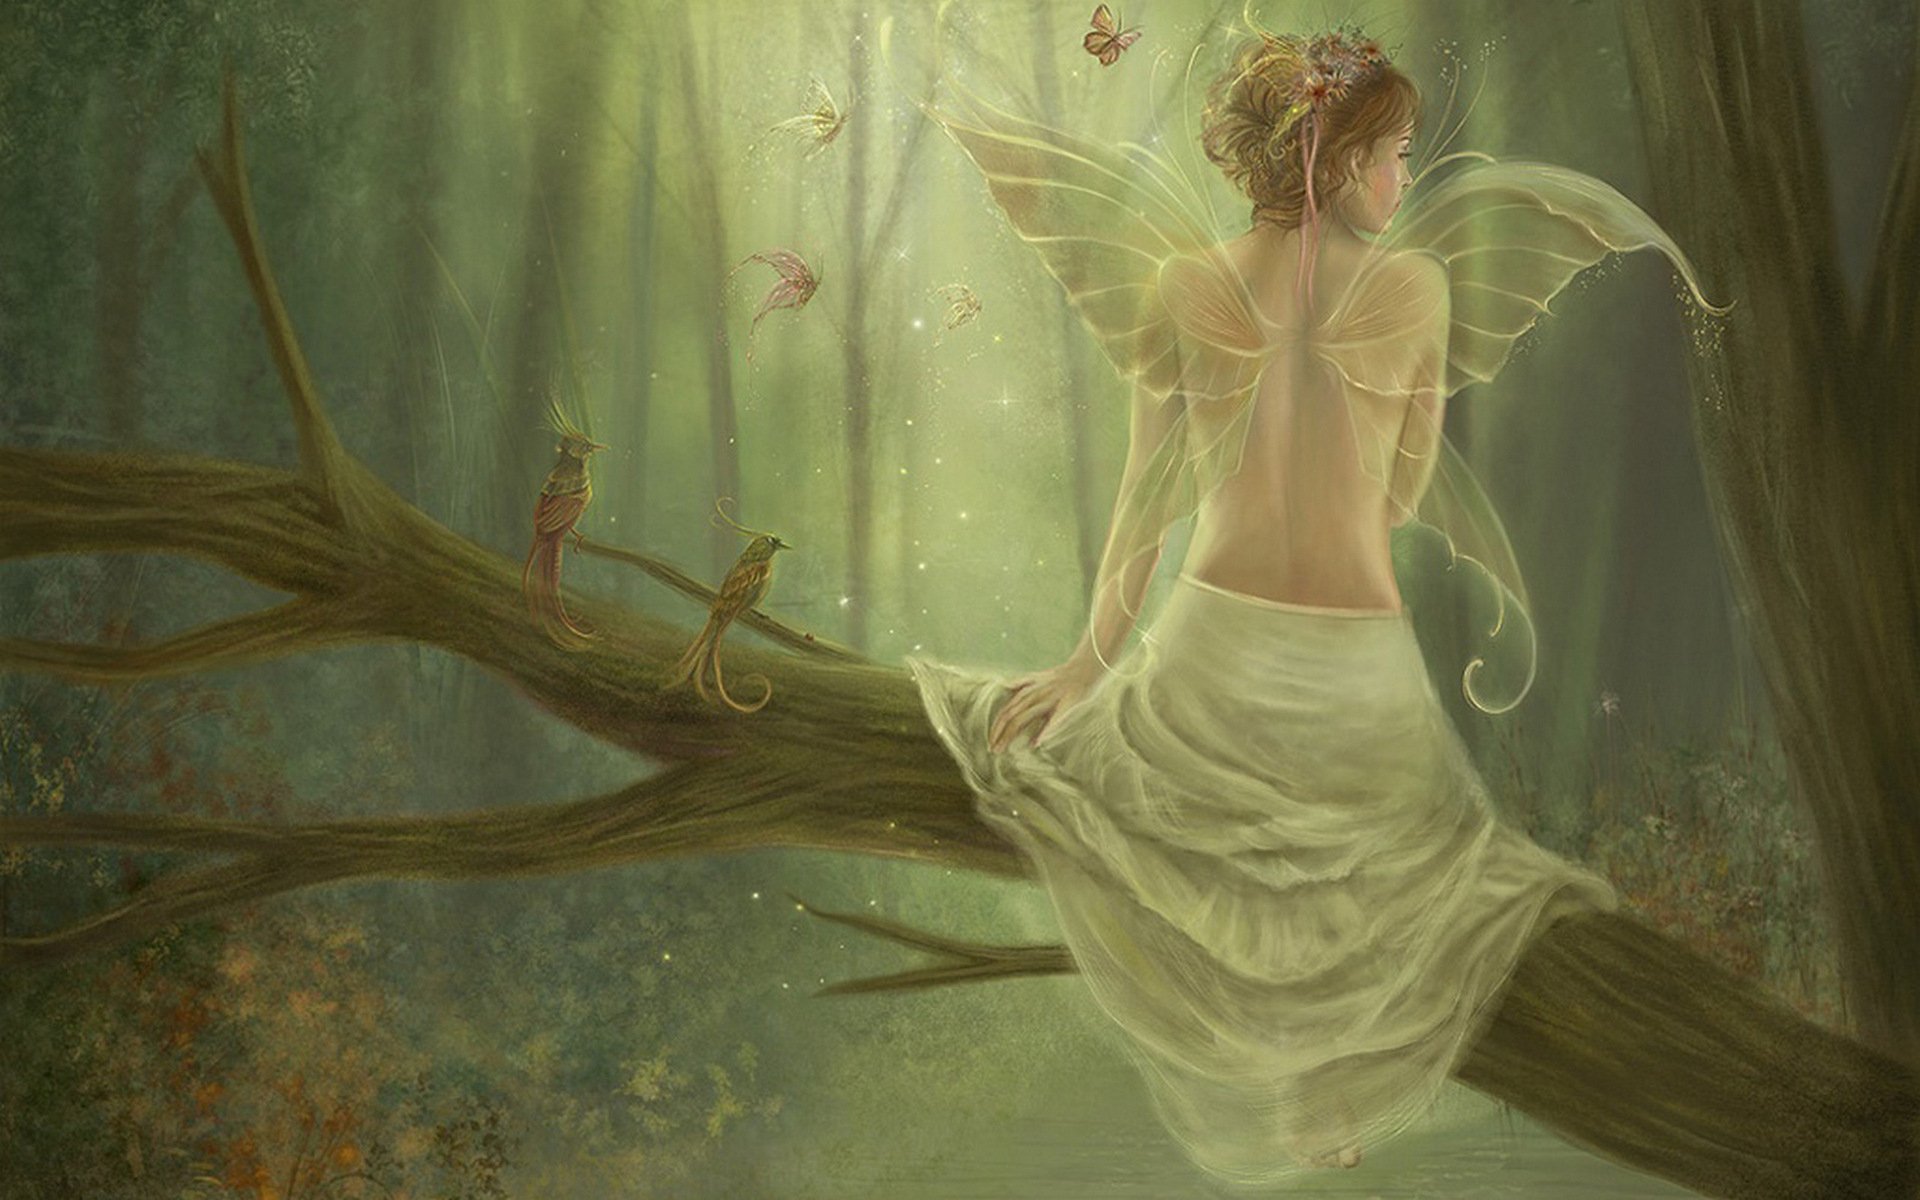 Fairy Full HD Wallpaper and Background Image | 1920x1200 | ID:357592